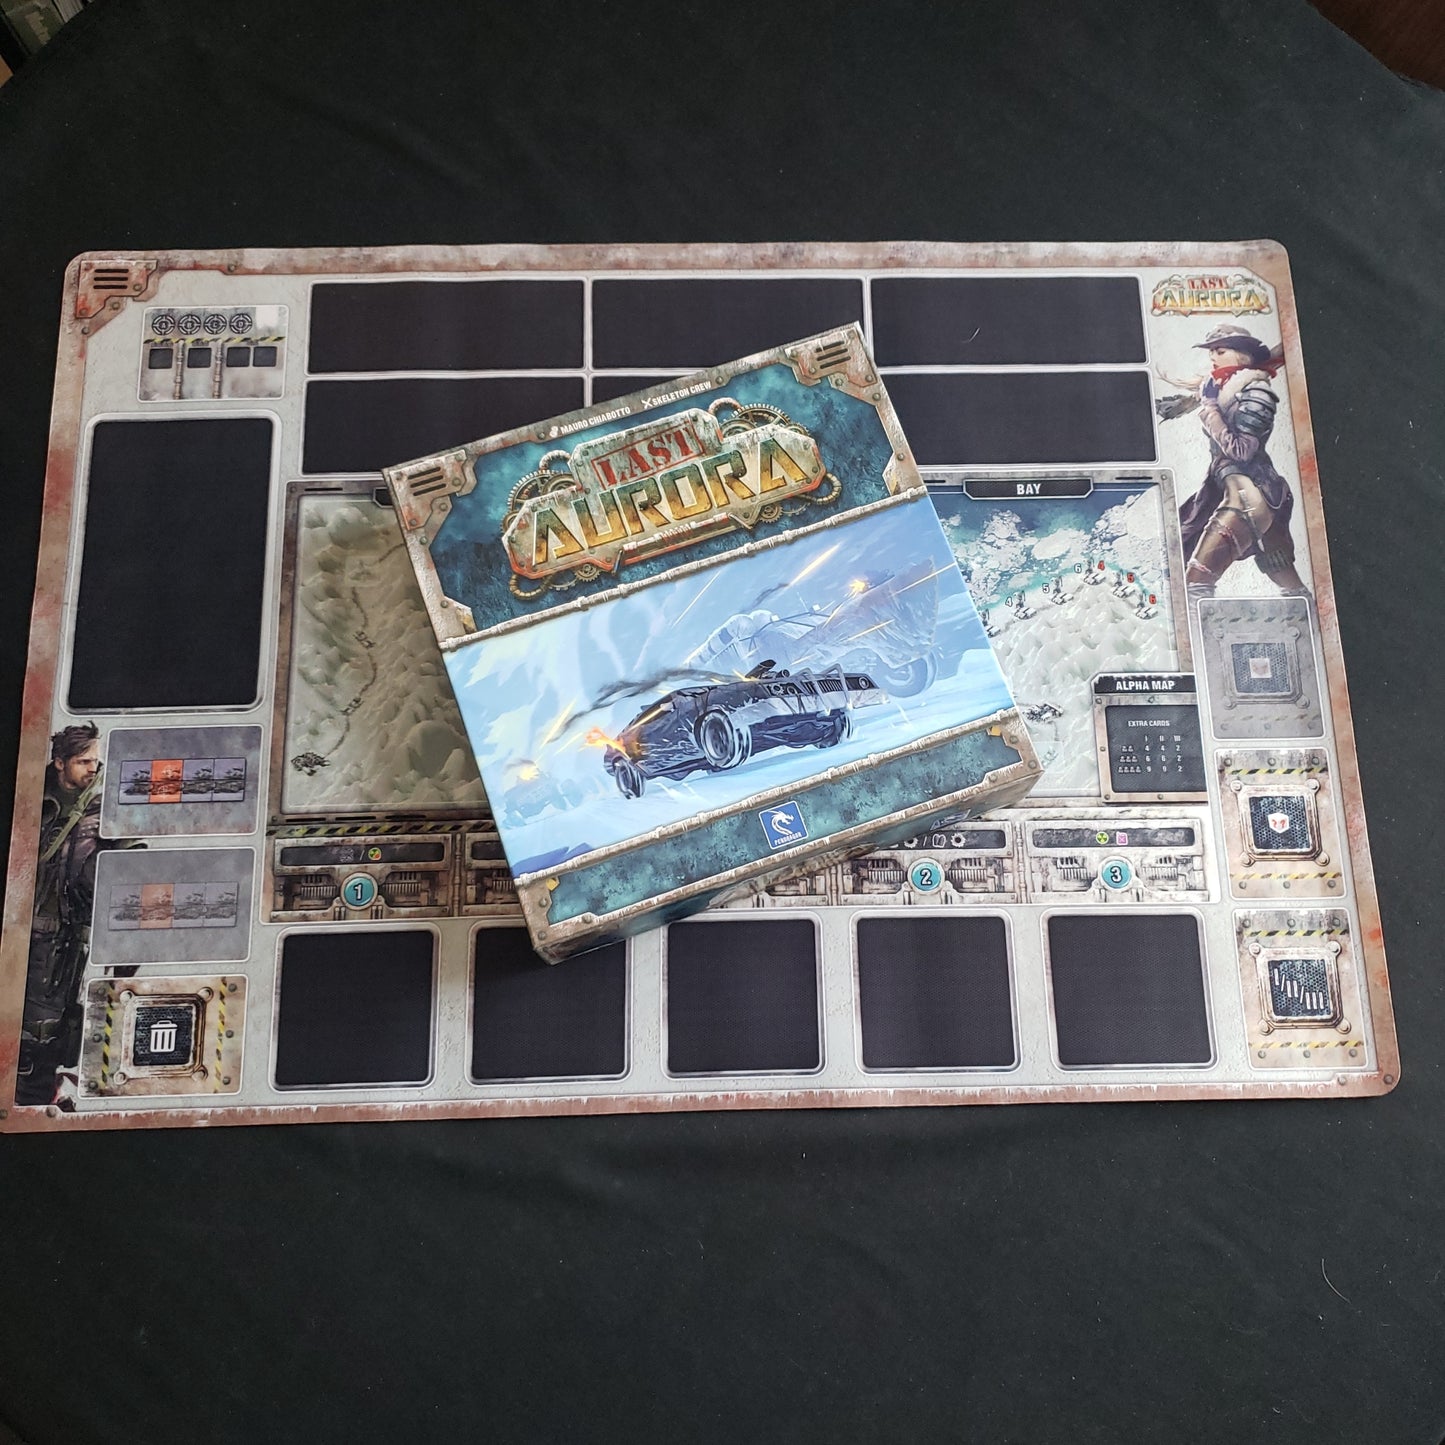 Image shows the box of the Last Aurora board game sitting onto of the neoprene playmat for the game